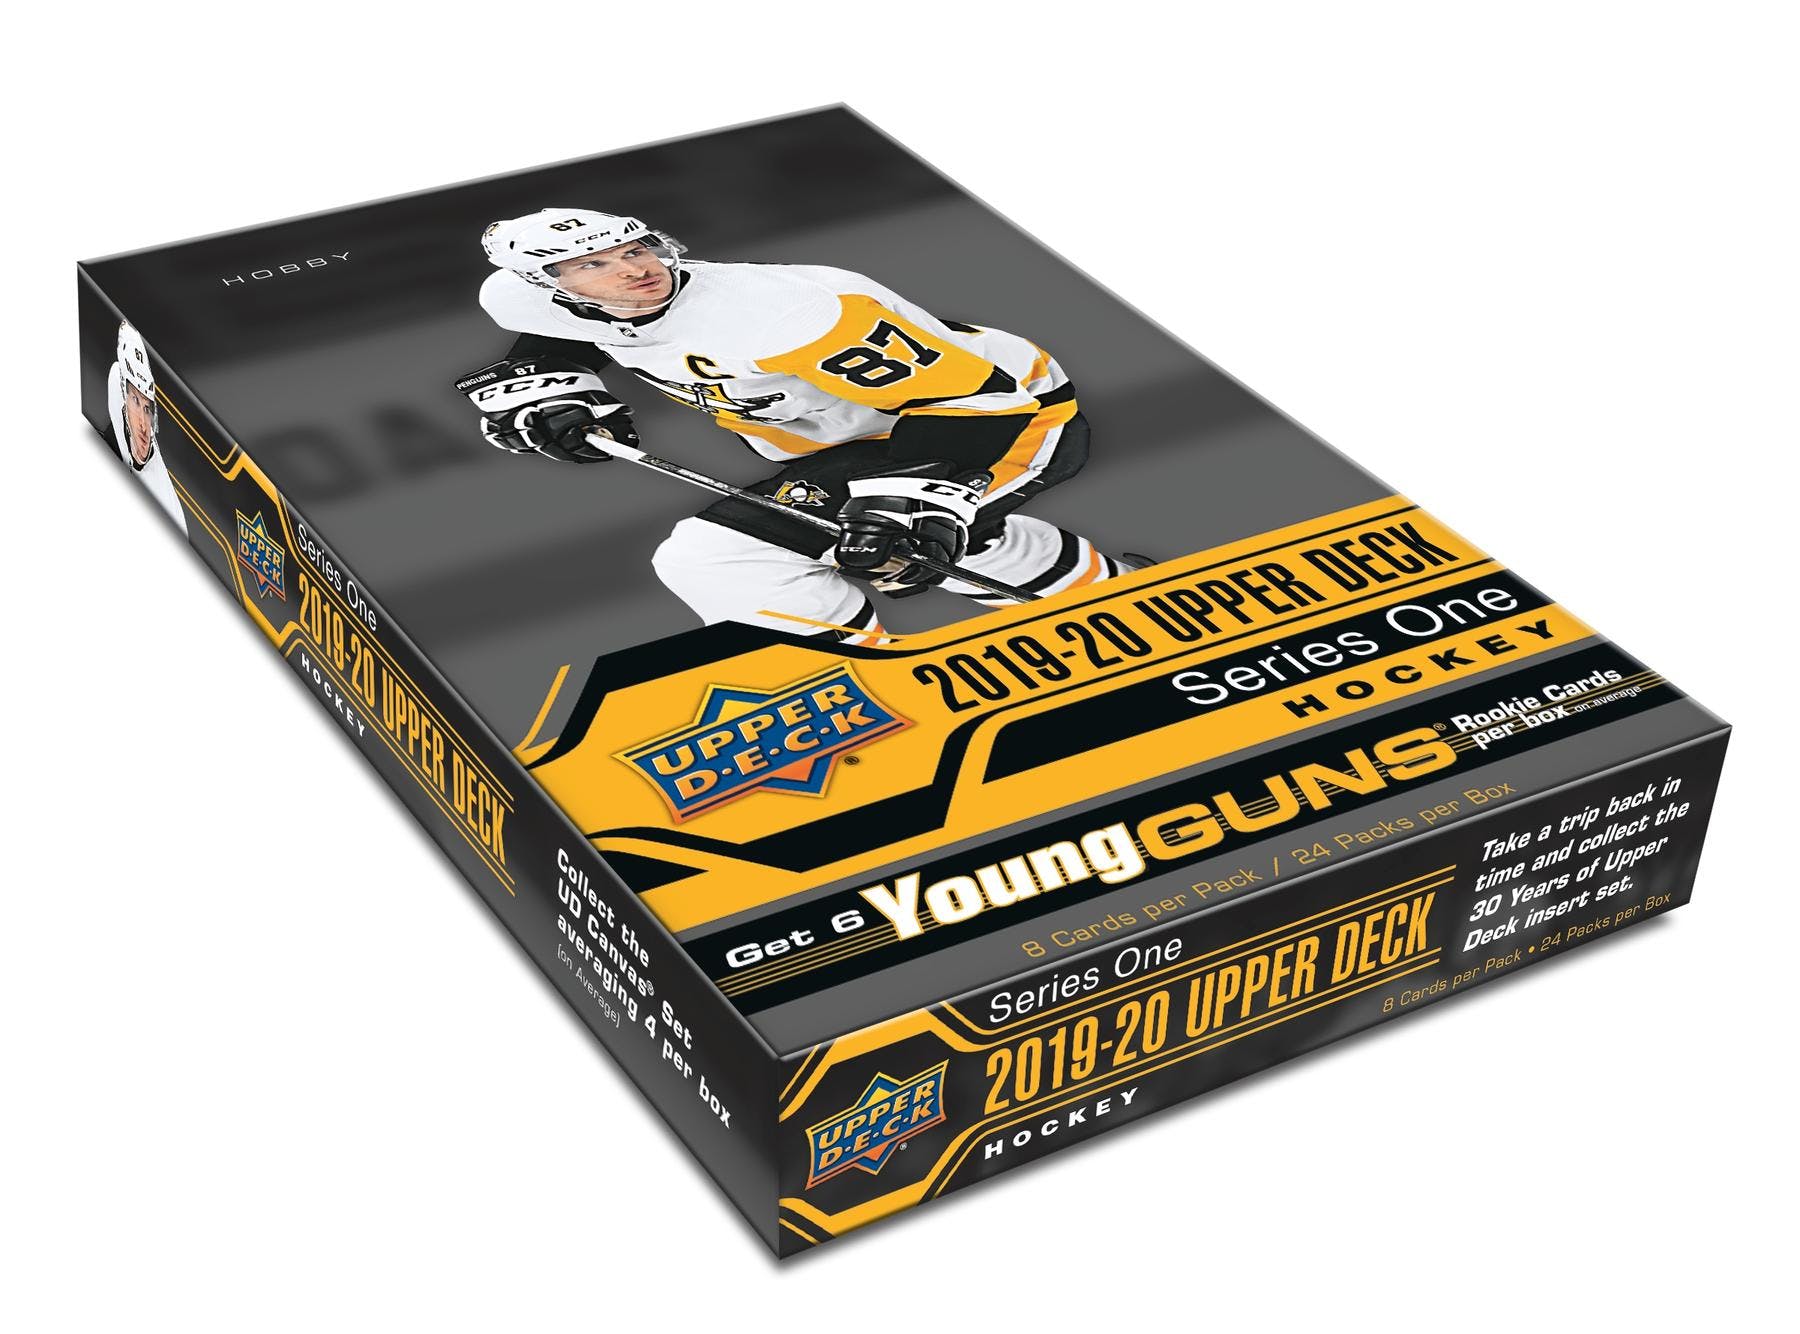 2019-20 Upper Deck Series 1 Hockey Hobby Case (Boxes of 12 ) - BigBoi Cards